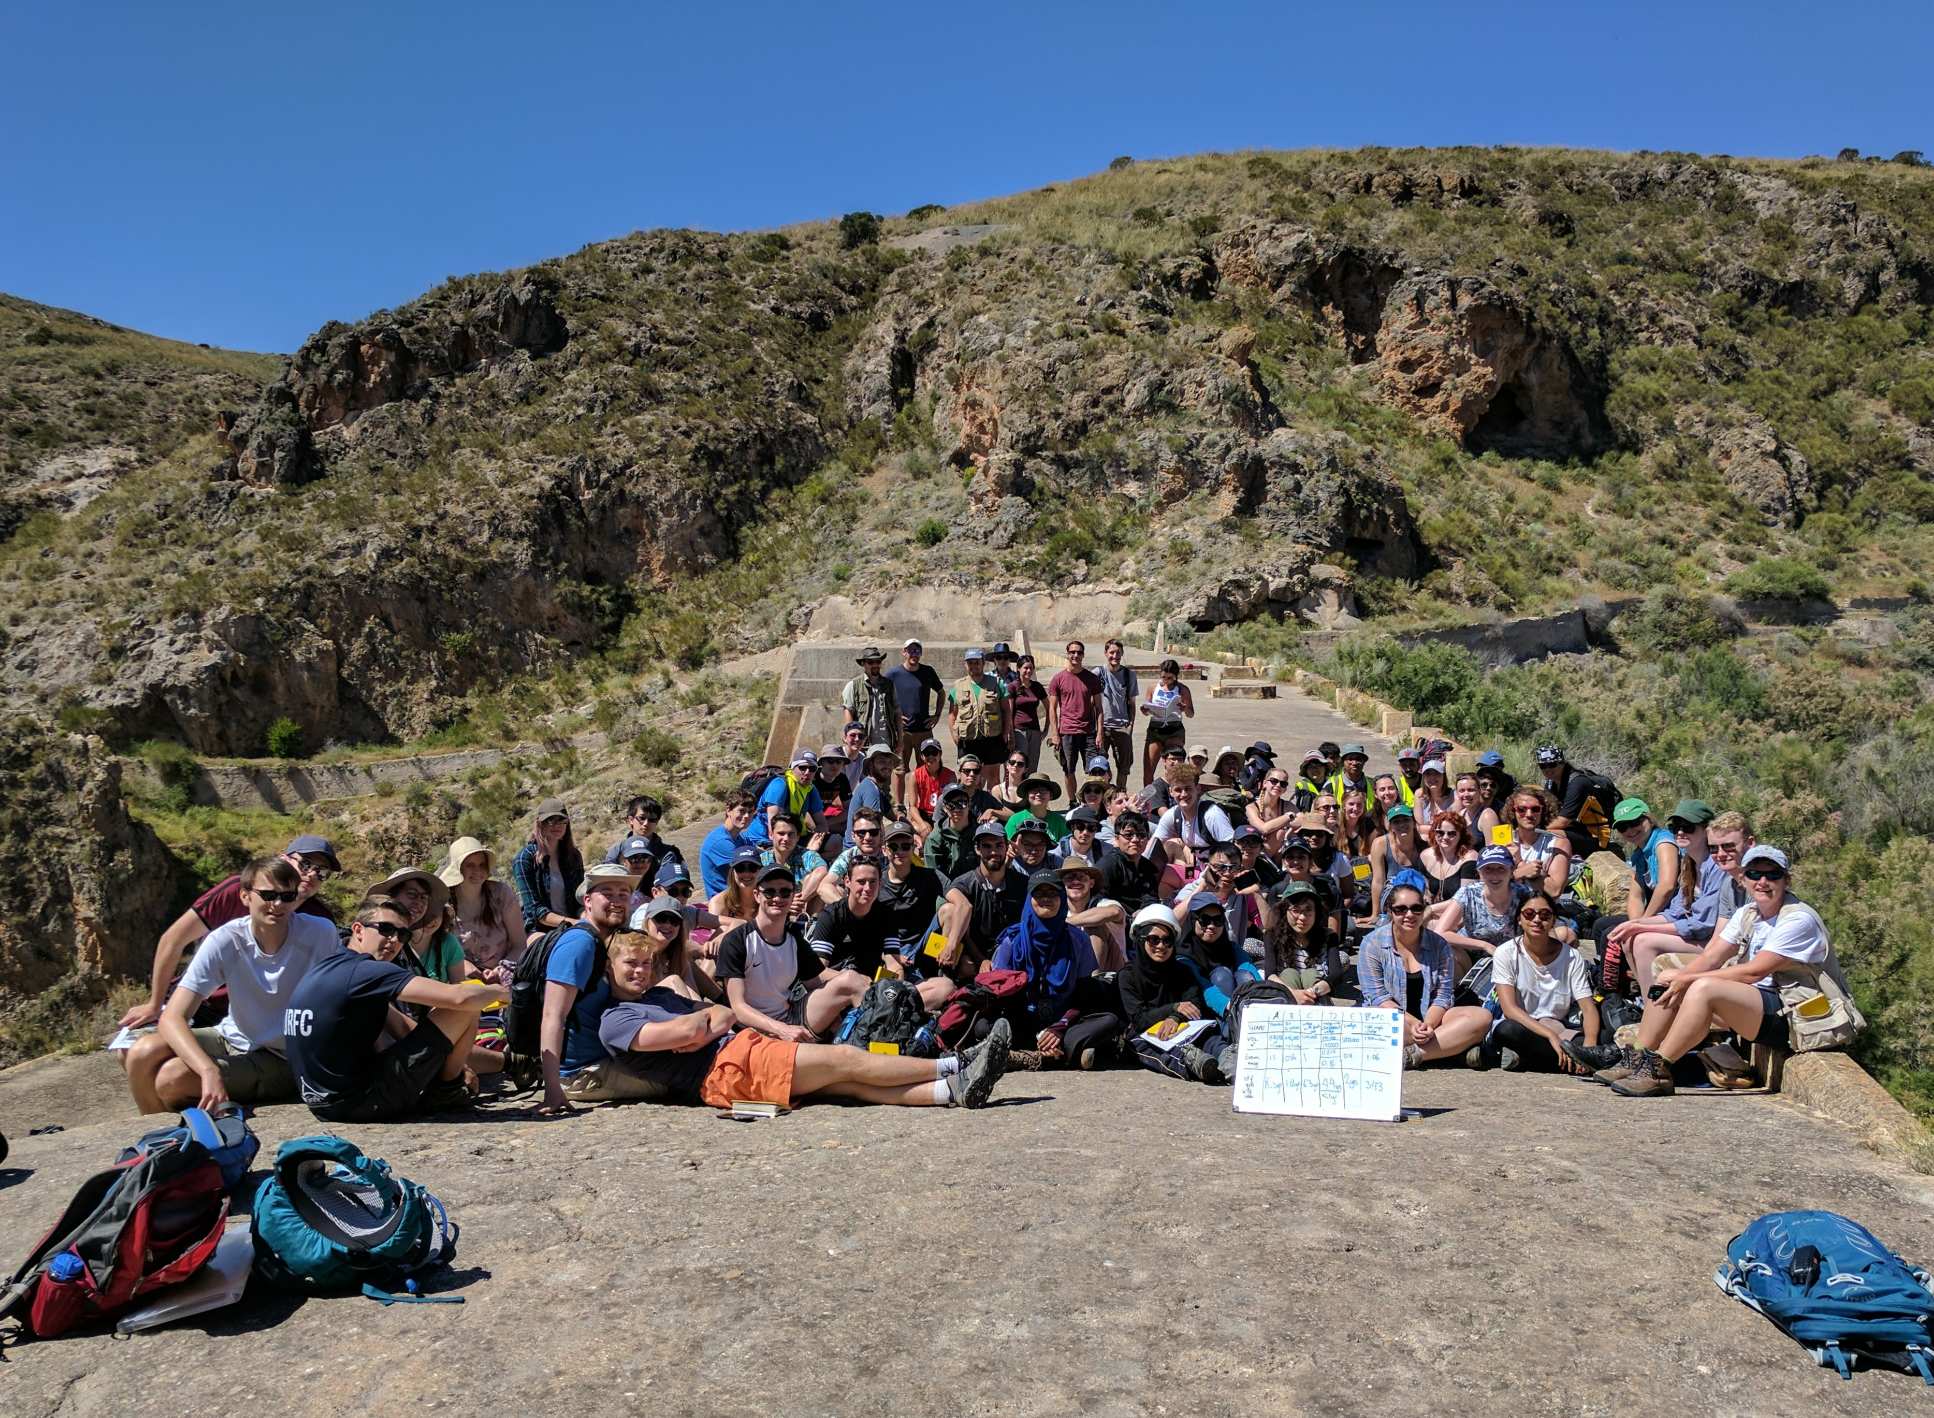 A large group of students on the 2017 Almeria field trip sit together with rocky hills in the background